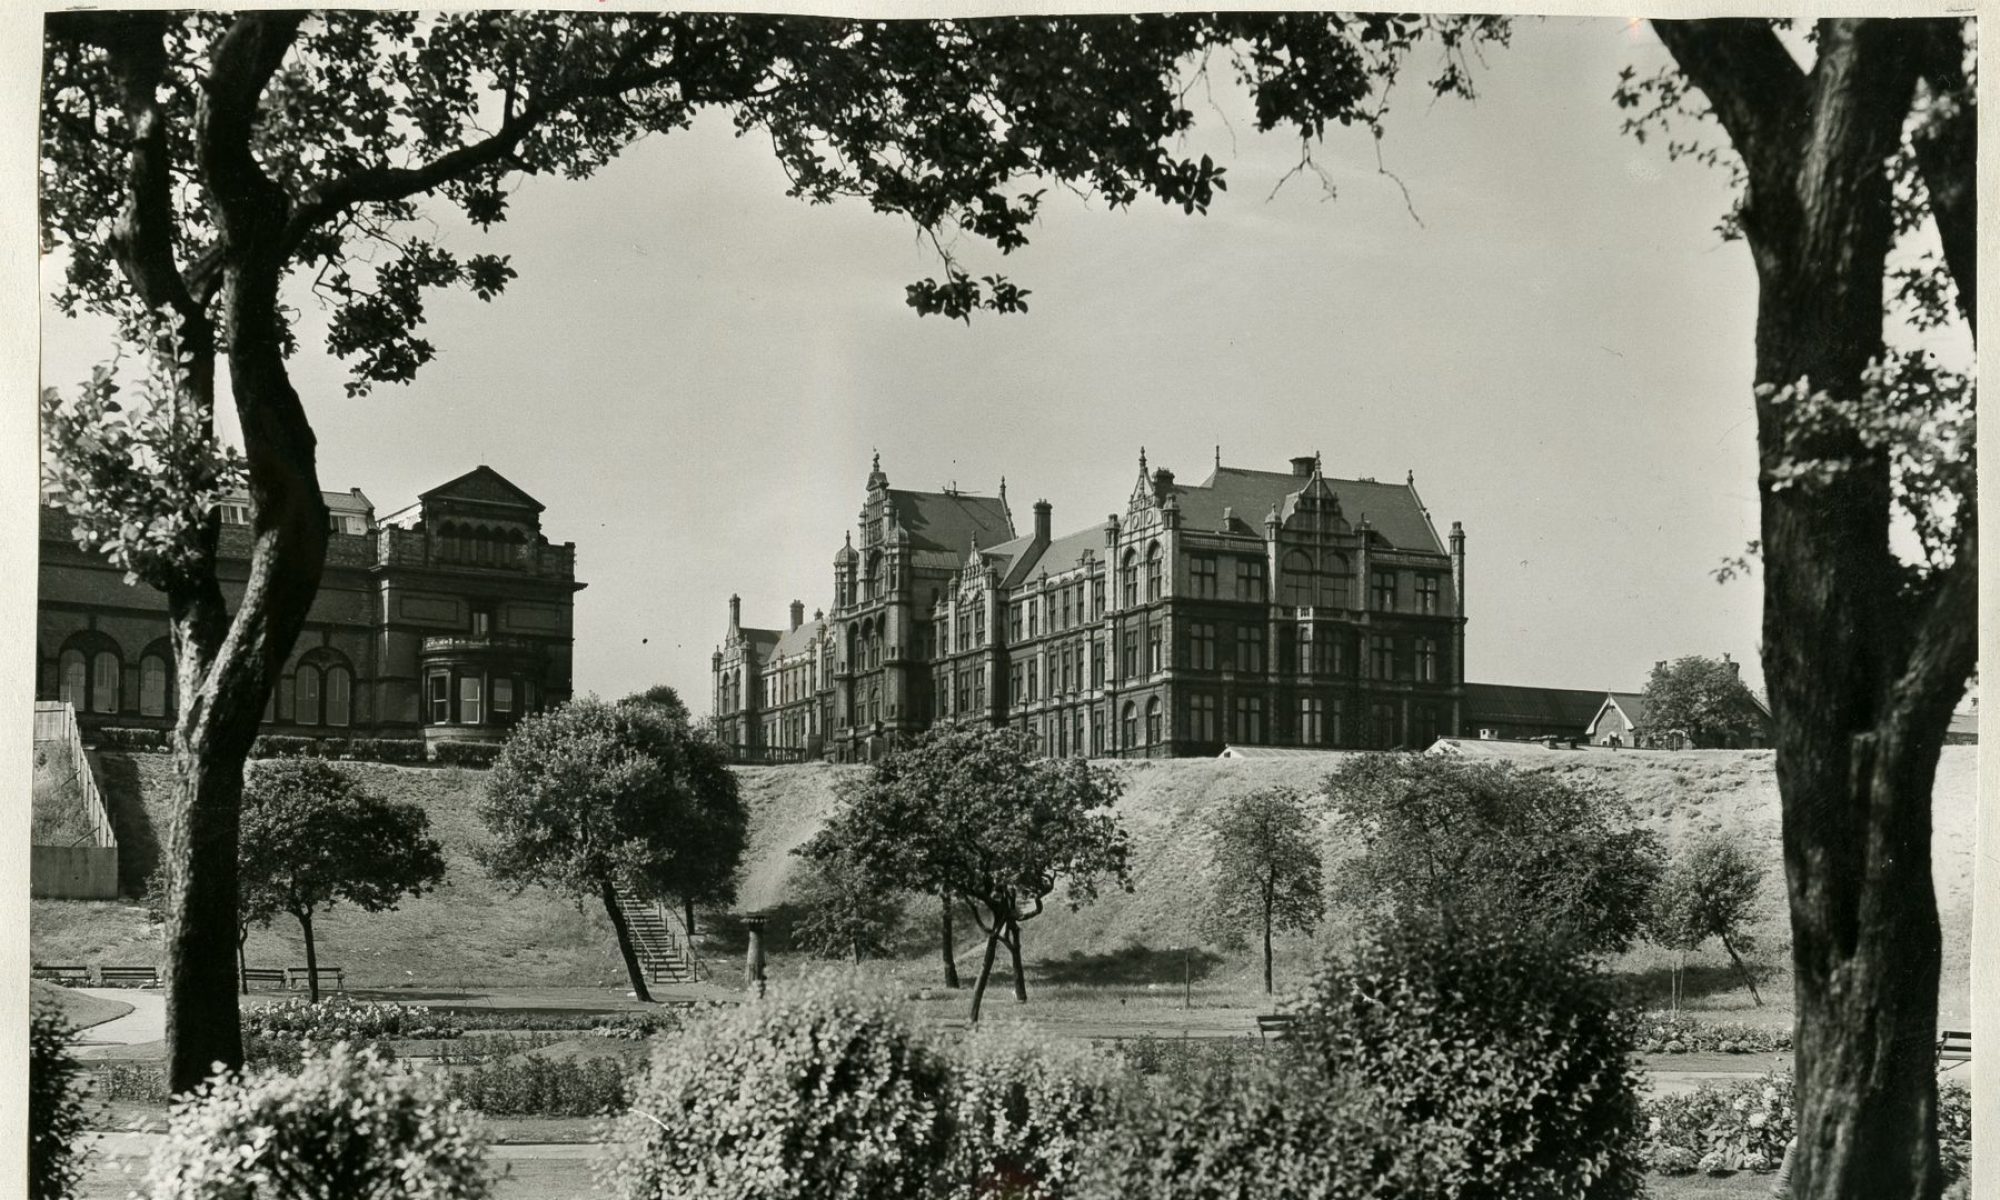 A historic black and white photograph of Peel Park and Peel Building in Salford, England. In the foreground and midground are shrubs and trees filled with leaves. To the left of the image is Salford Museum and Art Gallery, and to the right is Peel Building, a large red brick building with many windows, some overlooking the park.